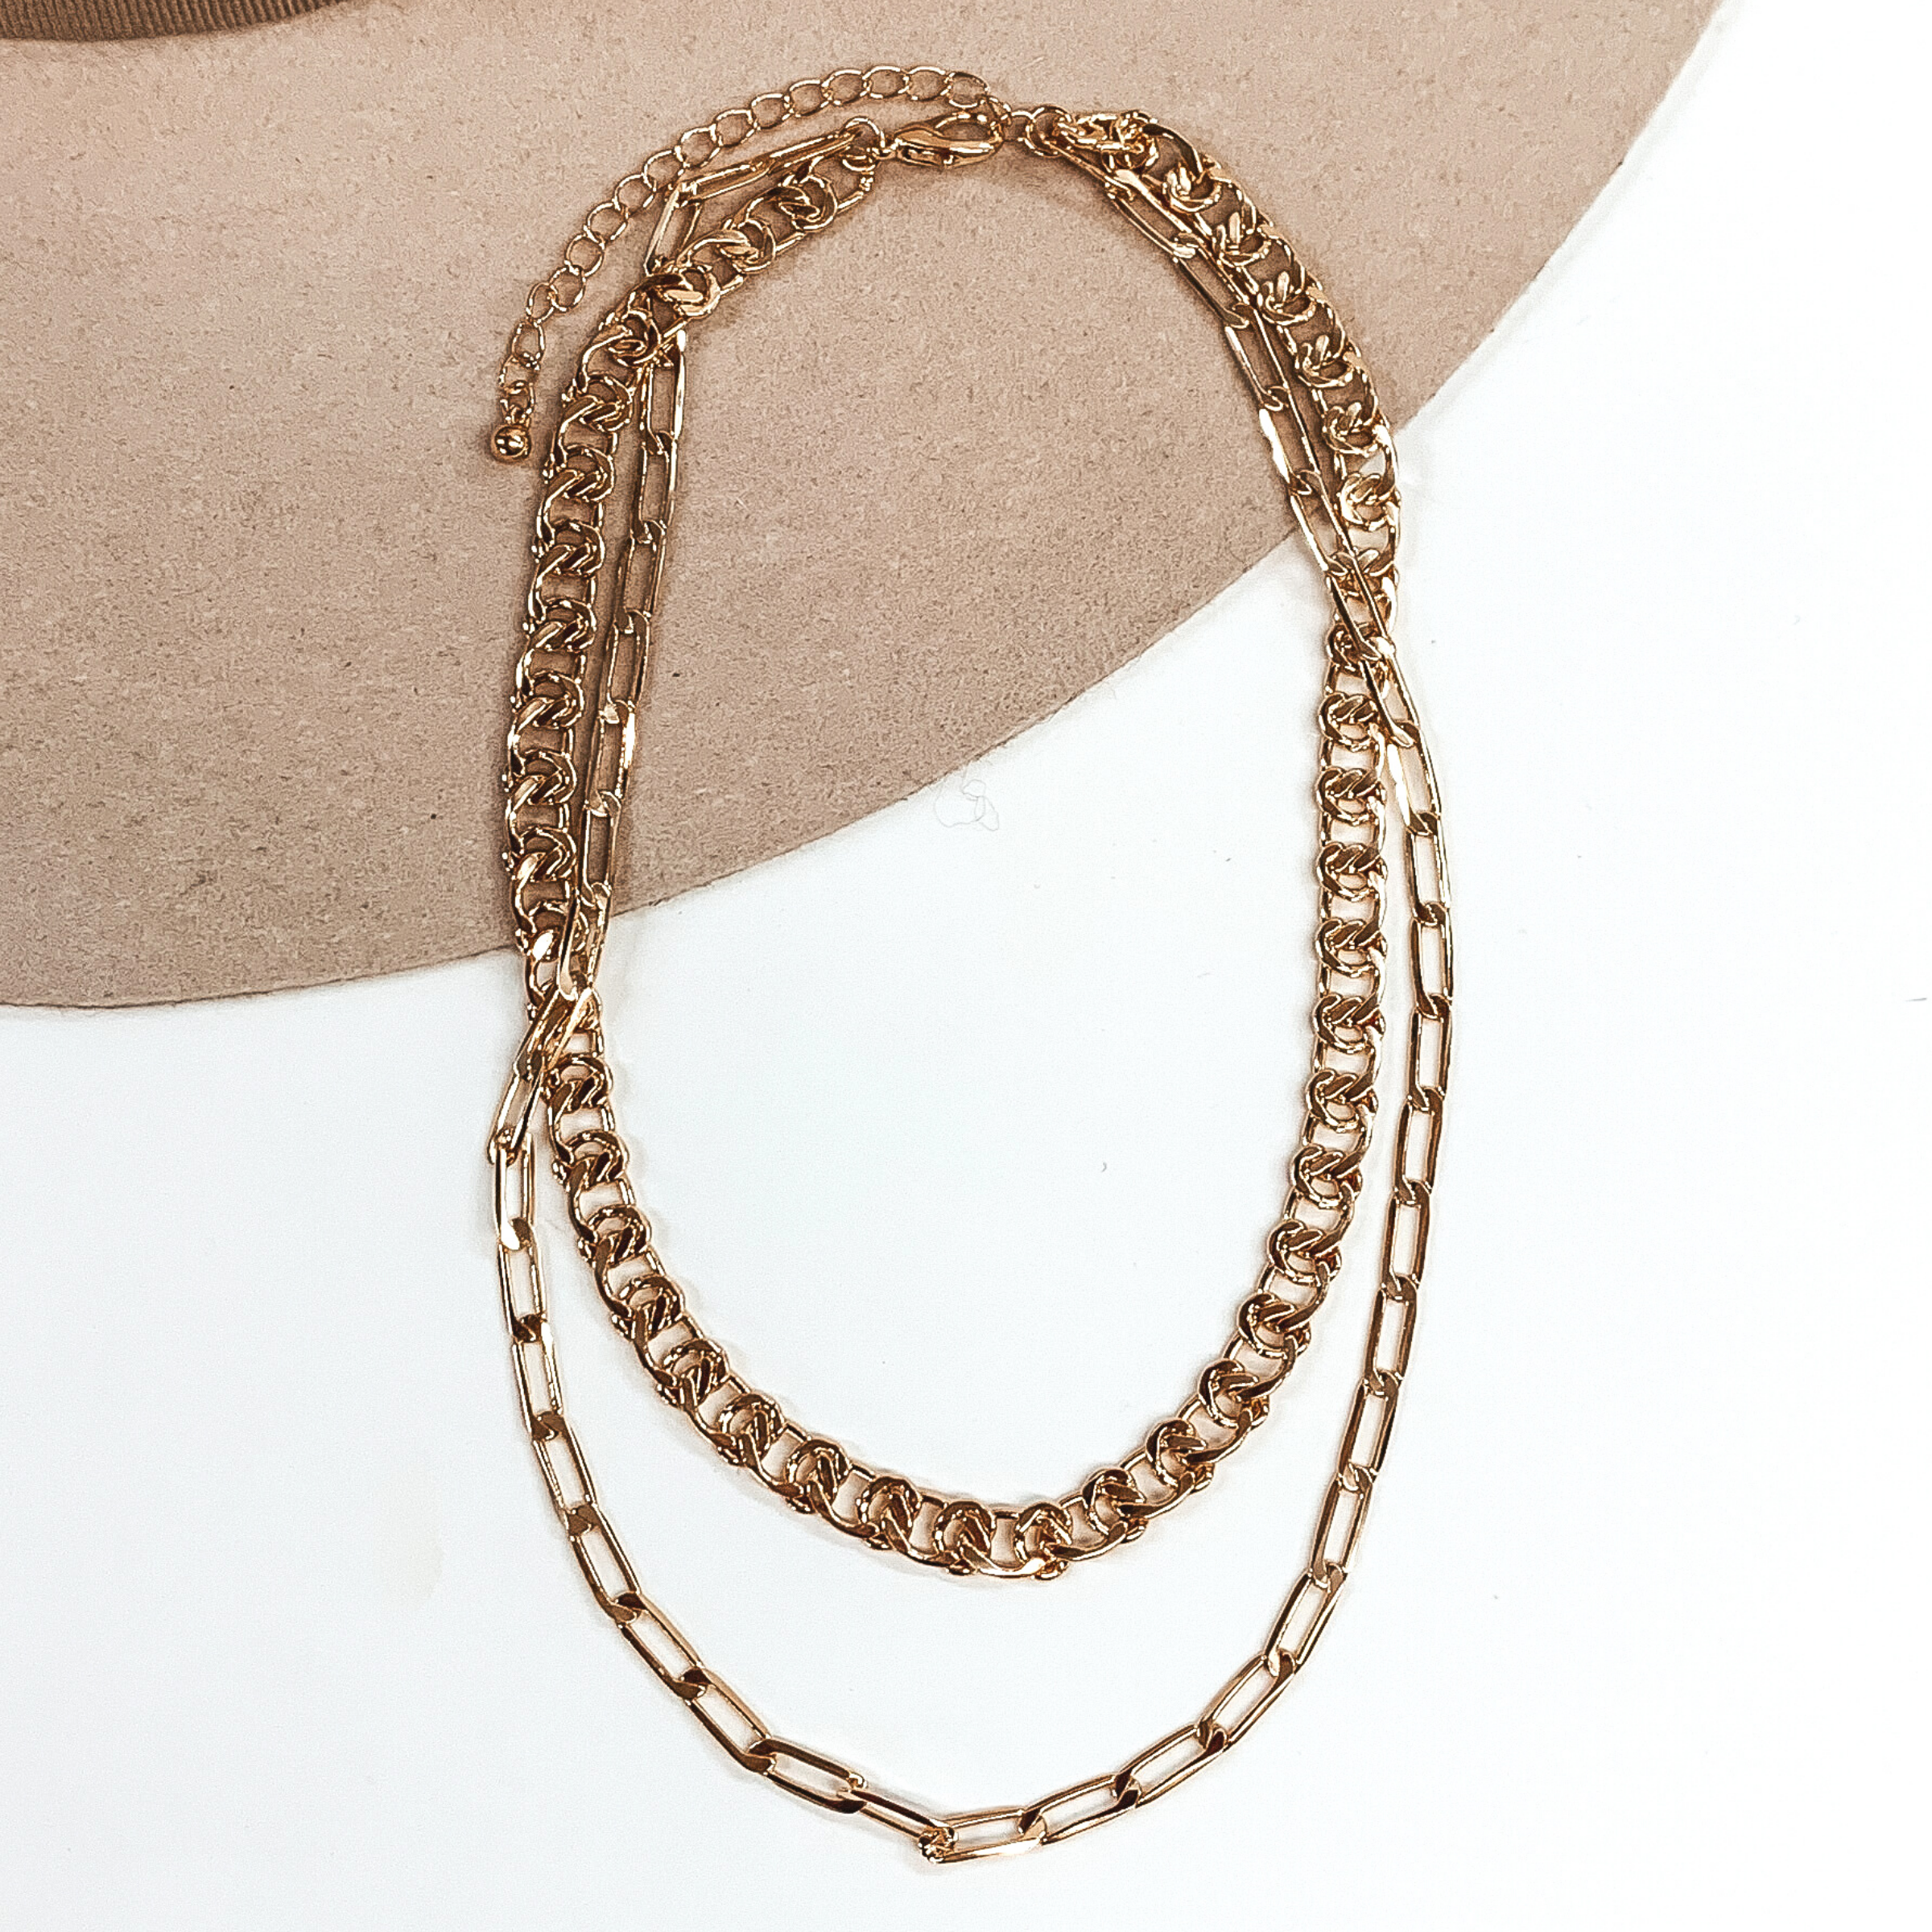 This is a gold double layer, adjustable, chained necklace. There are two different types of chains; a thick curb chain and a thin paperclip chain. this necklace is pictured on a white and beige background.